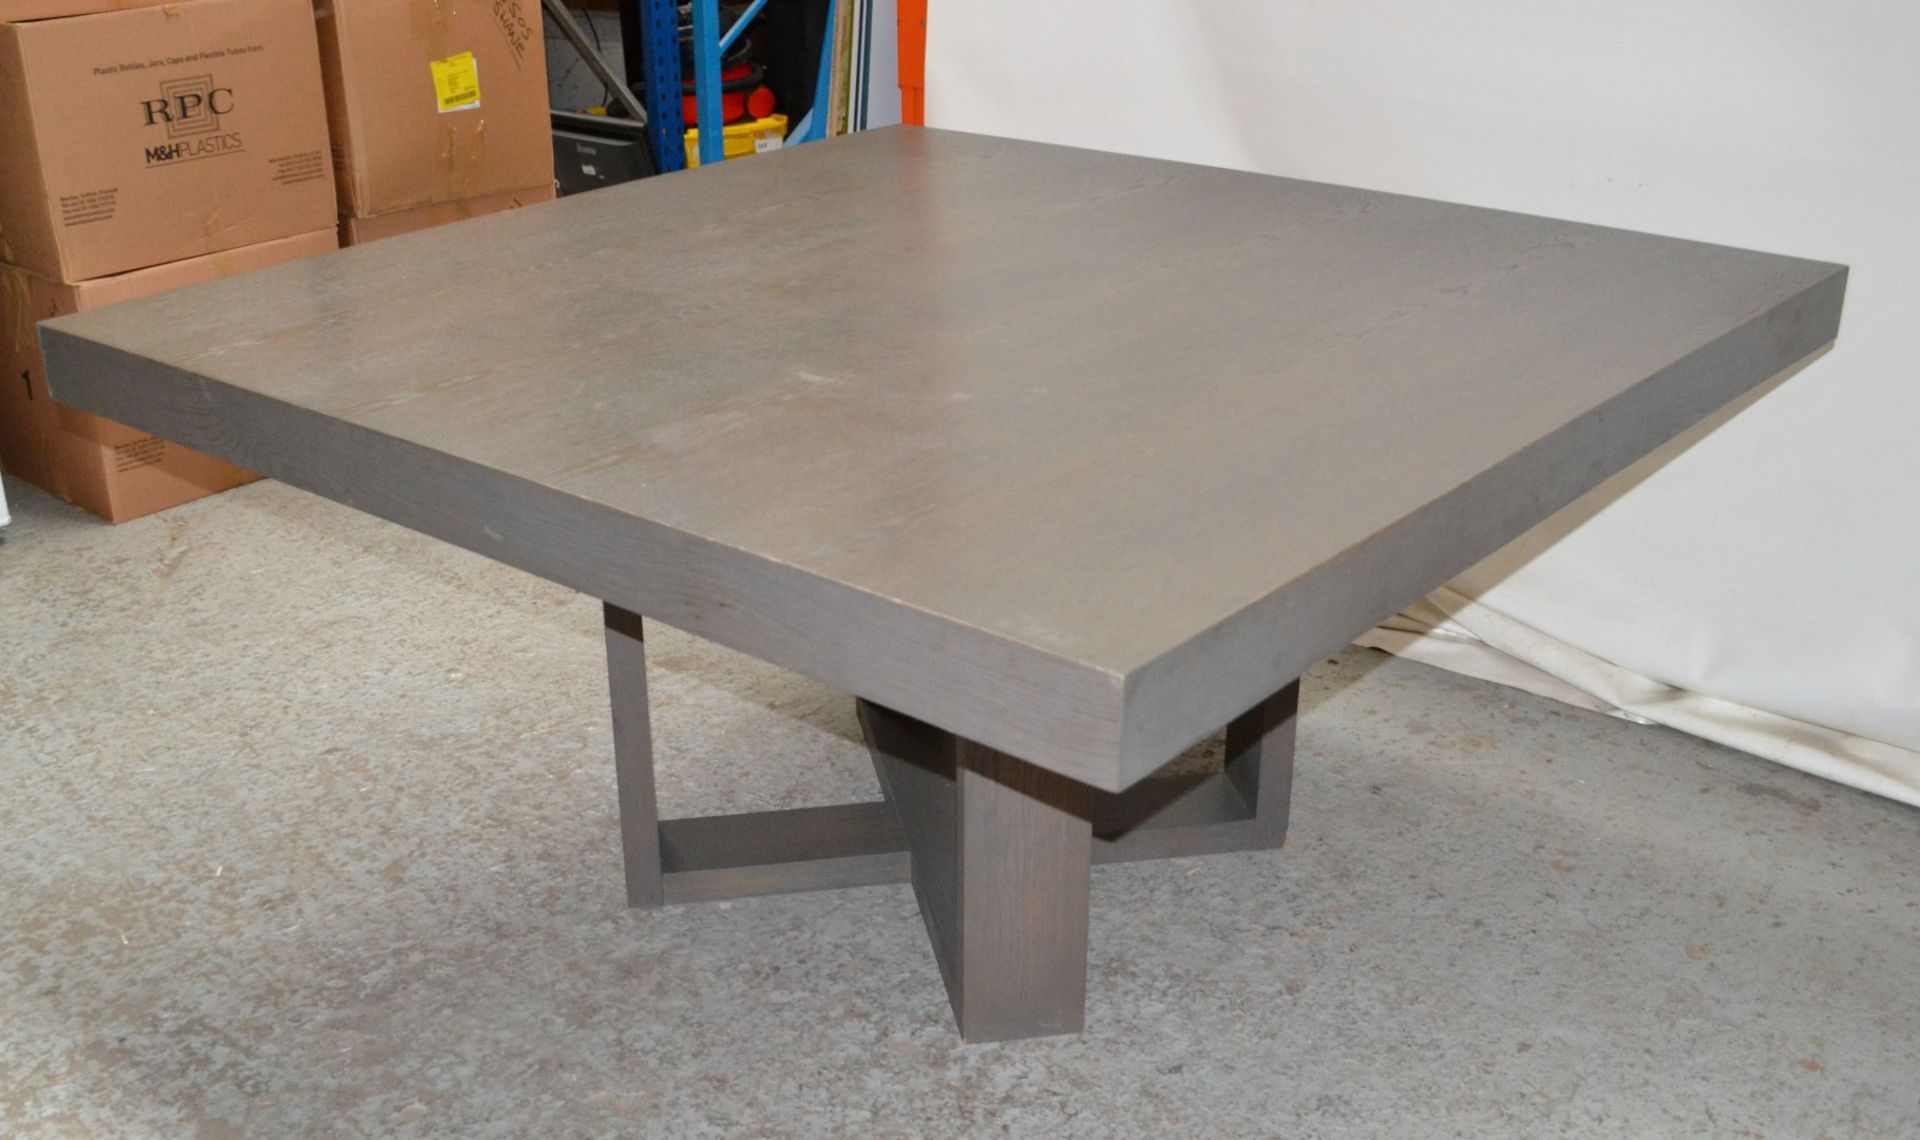 1 x Large Square Wooden Dining Table in a Grey Oak Coloured Finish - CL314 - Location: Altrincham - Image 6 of 10